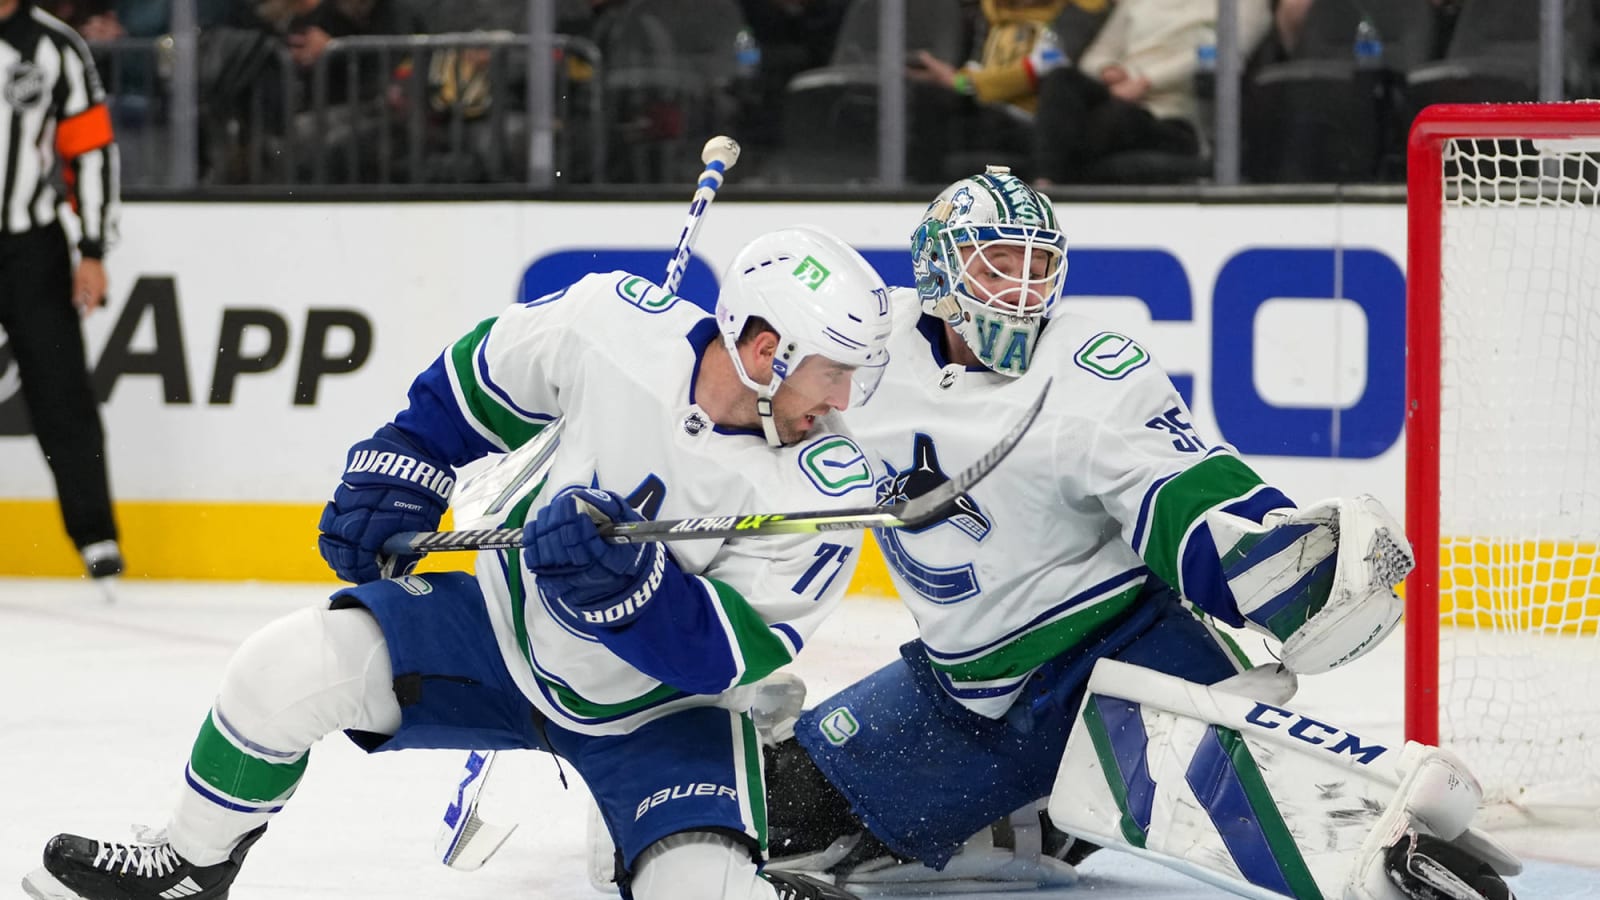 Who the Canucks’ sixth defenceman should be until Rathbone is ready: Burroughs or Hunt?